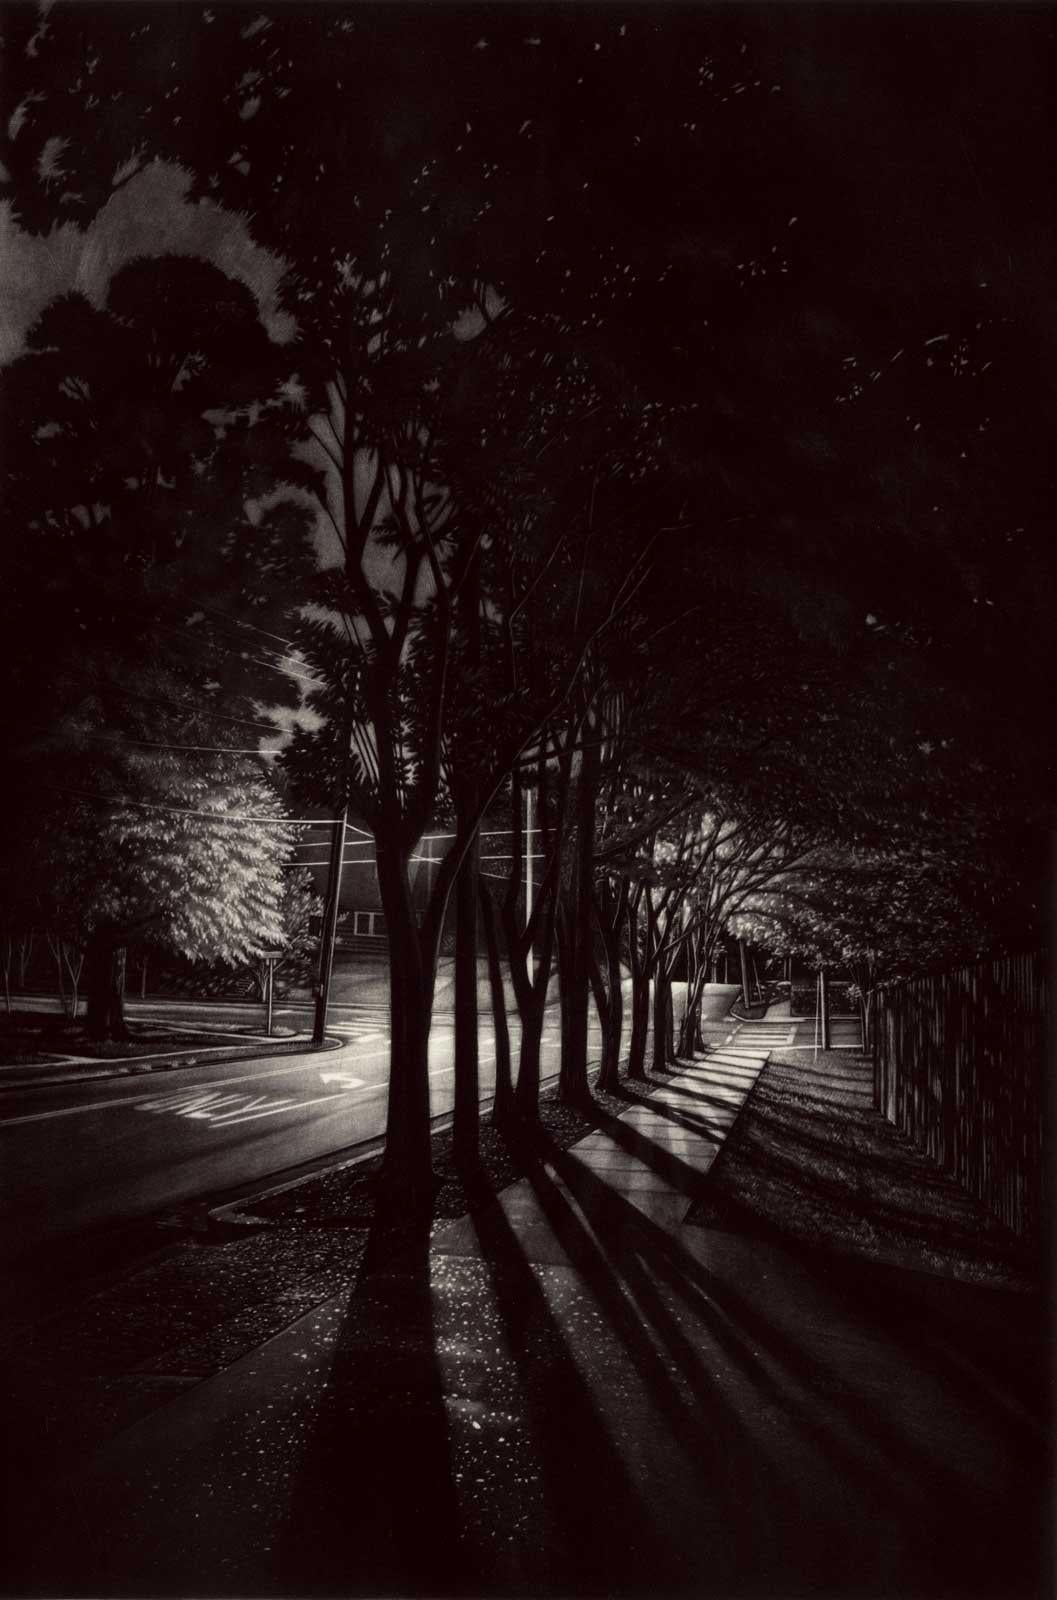 Jacob Crook Landscape Print - Spill (A canopy of crepe myrtle trees dominate this deep southern street night)